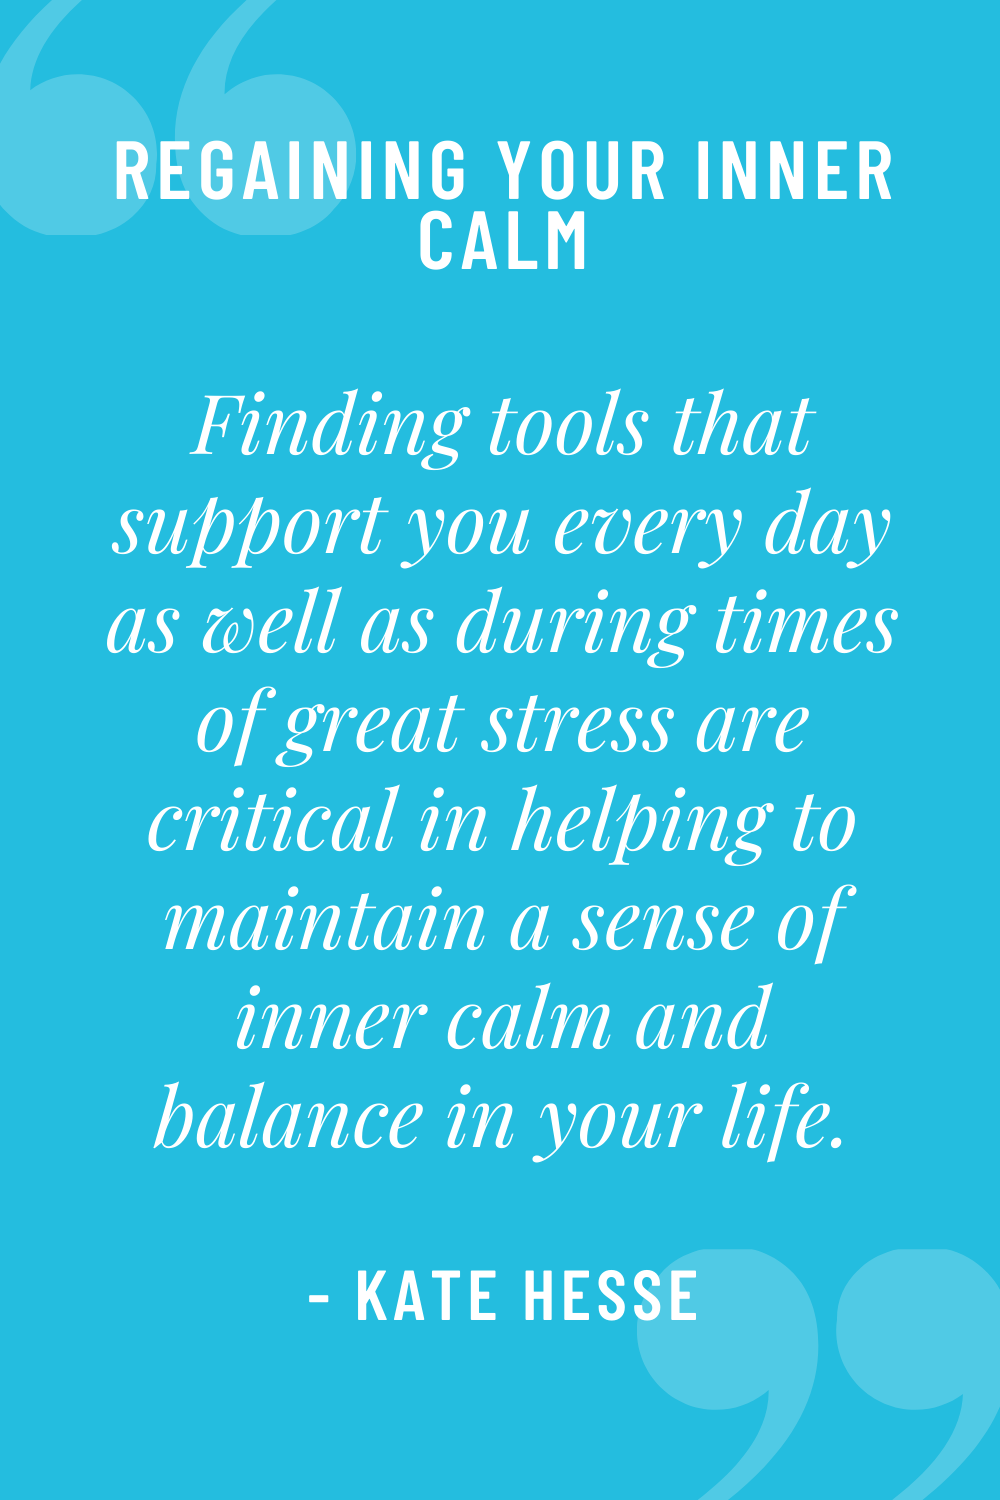 Finding tools that support you every day as well as during times of great stress are critical in helping to maintain a sense of inner calm and balance in your life.